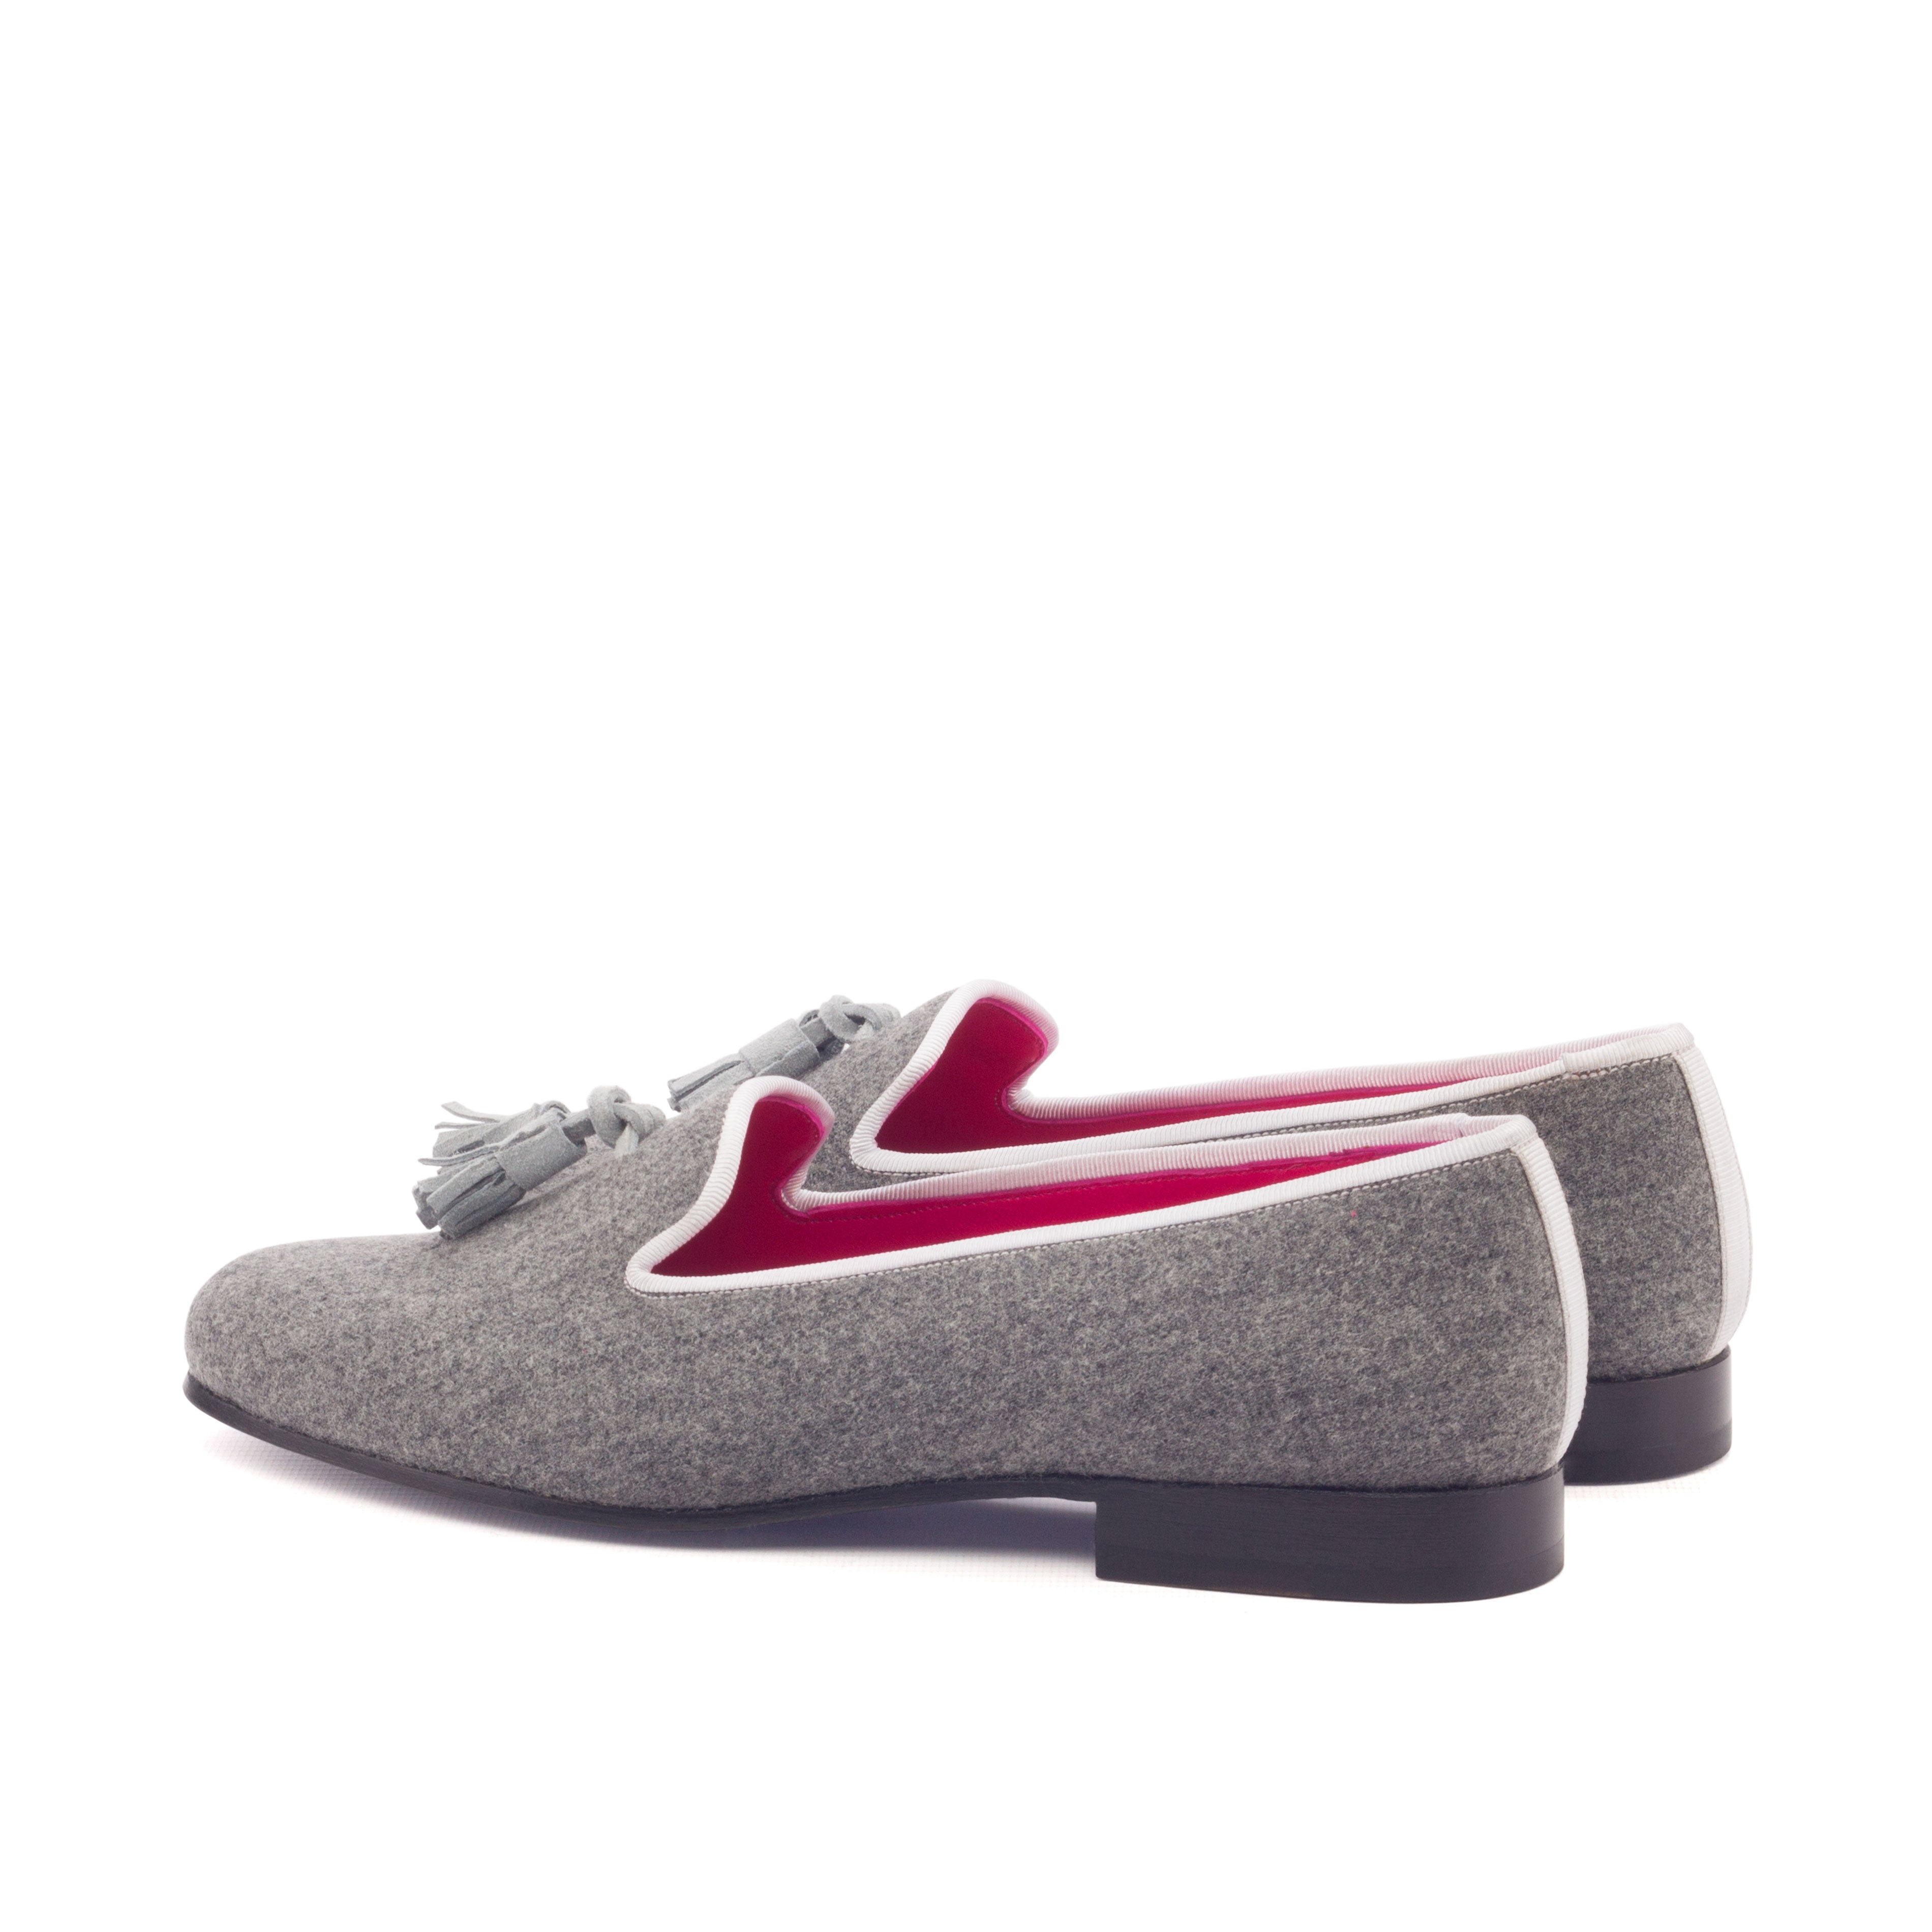 Light Grey Suede with White Grosgrain Trim